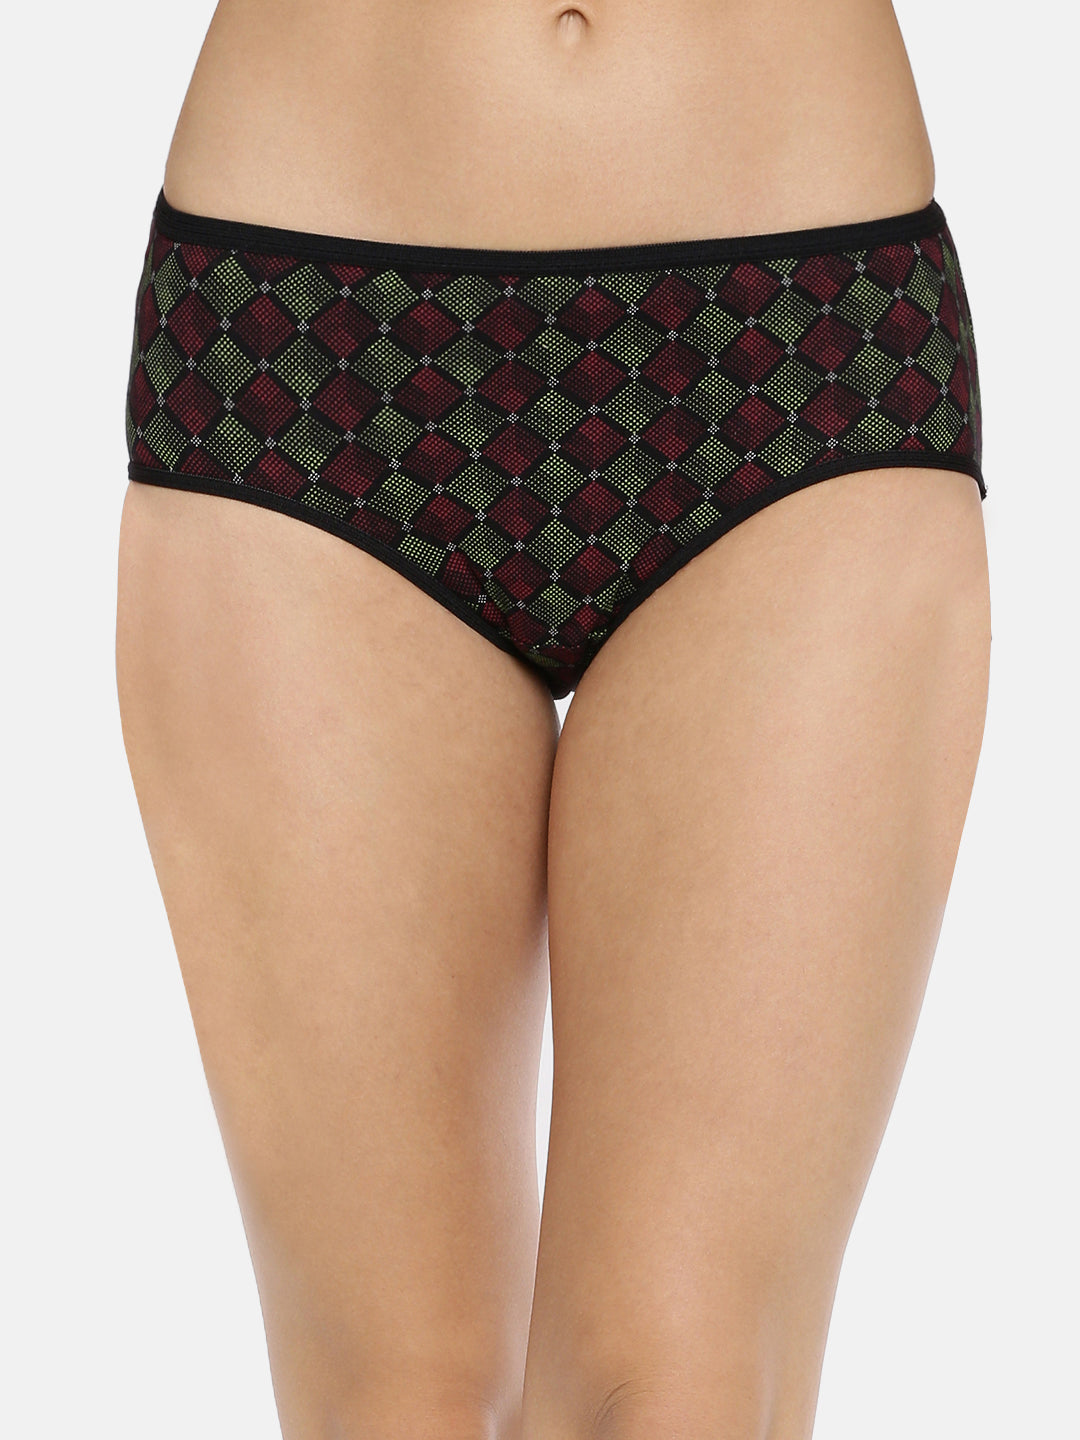 Red Rose Cotton Medium Rise, Full Coverage Hipster Panties - Multicolor Pack of 3